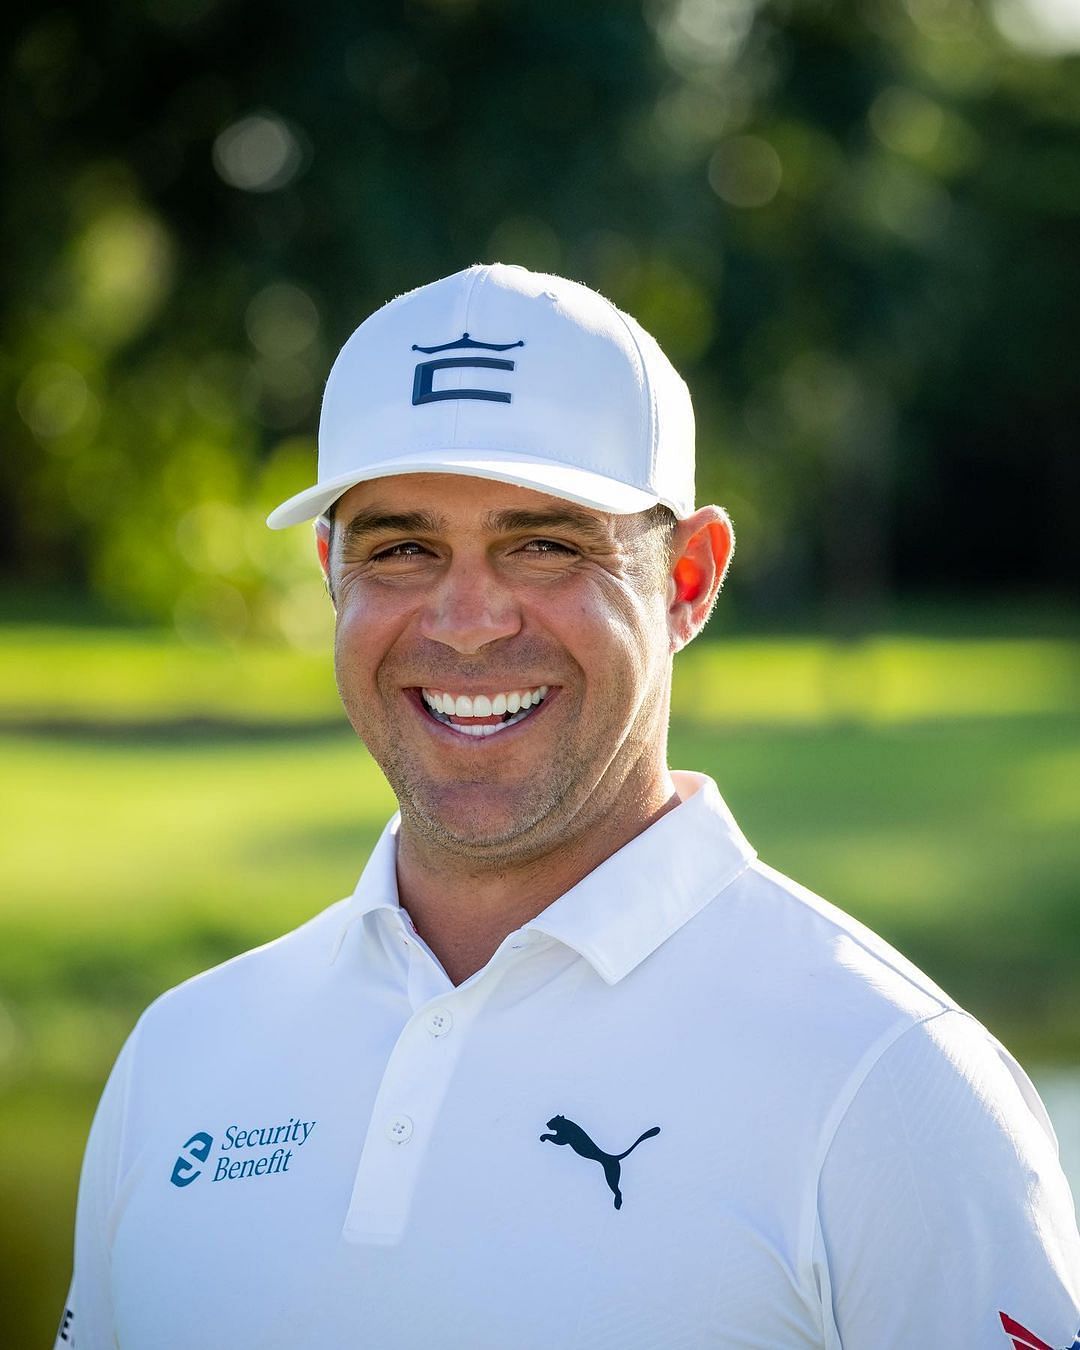 What is Gary Woodland's net worth as of 2023?